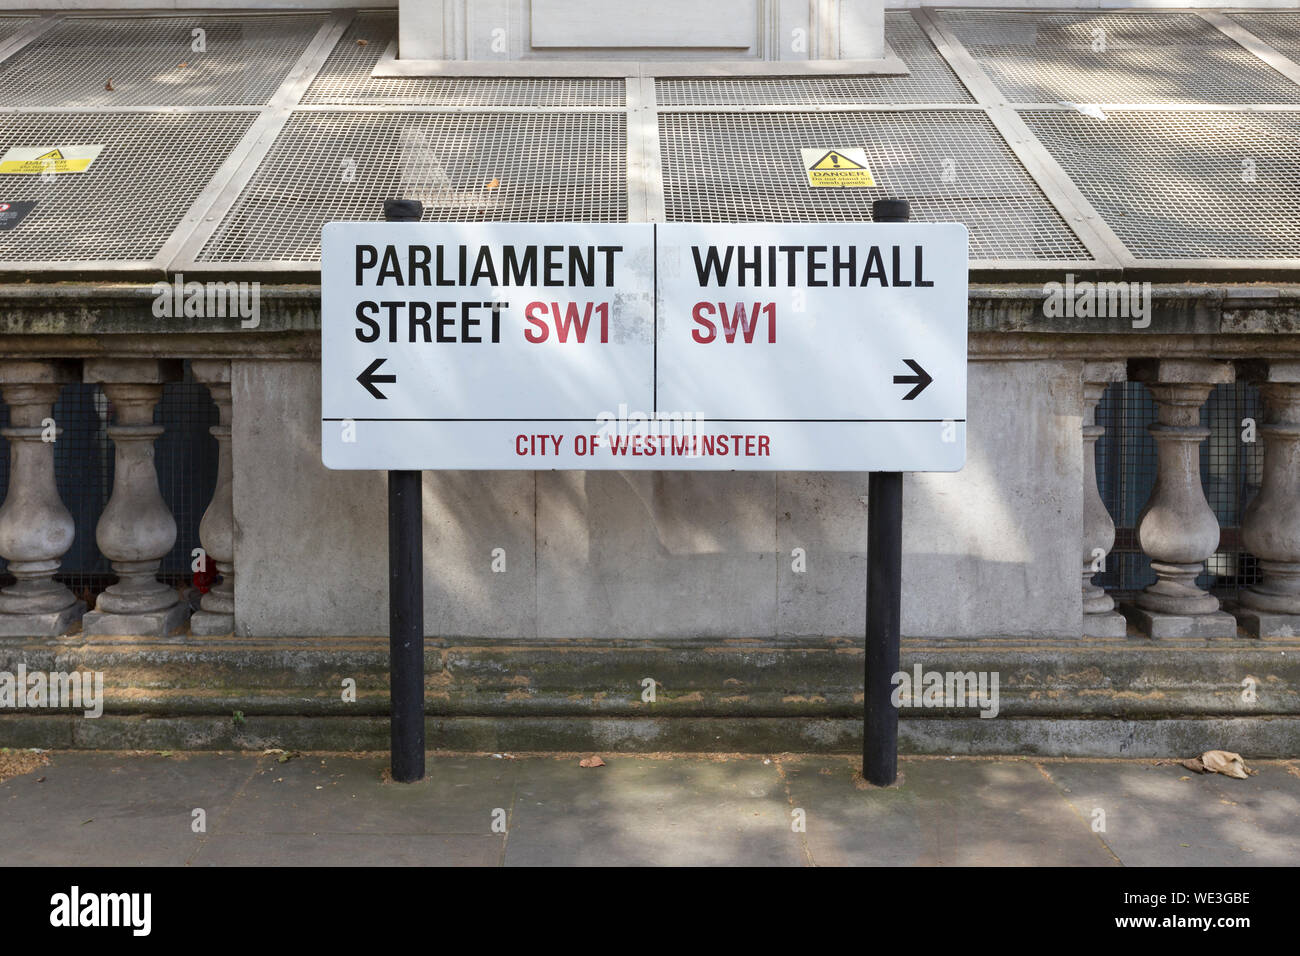 Parliament street and Whitehall street signs, Whitehall, London, England Stock Photo